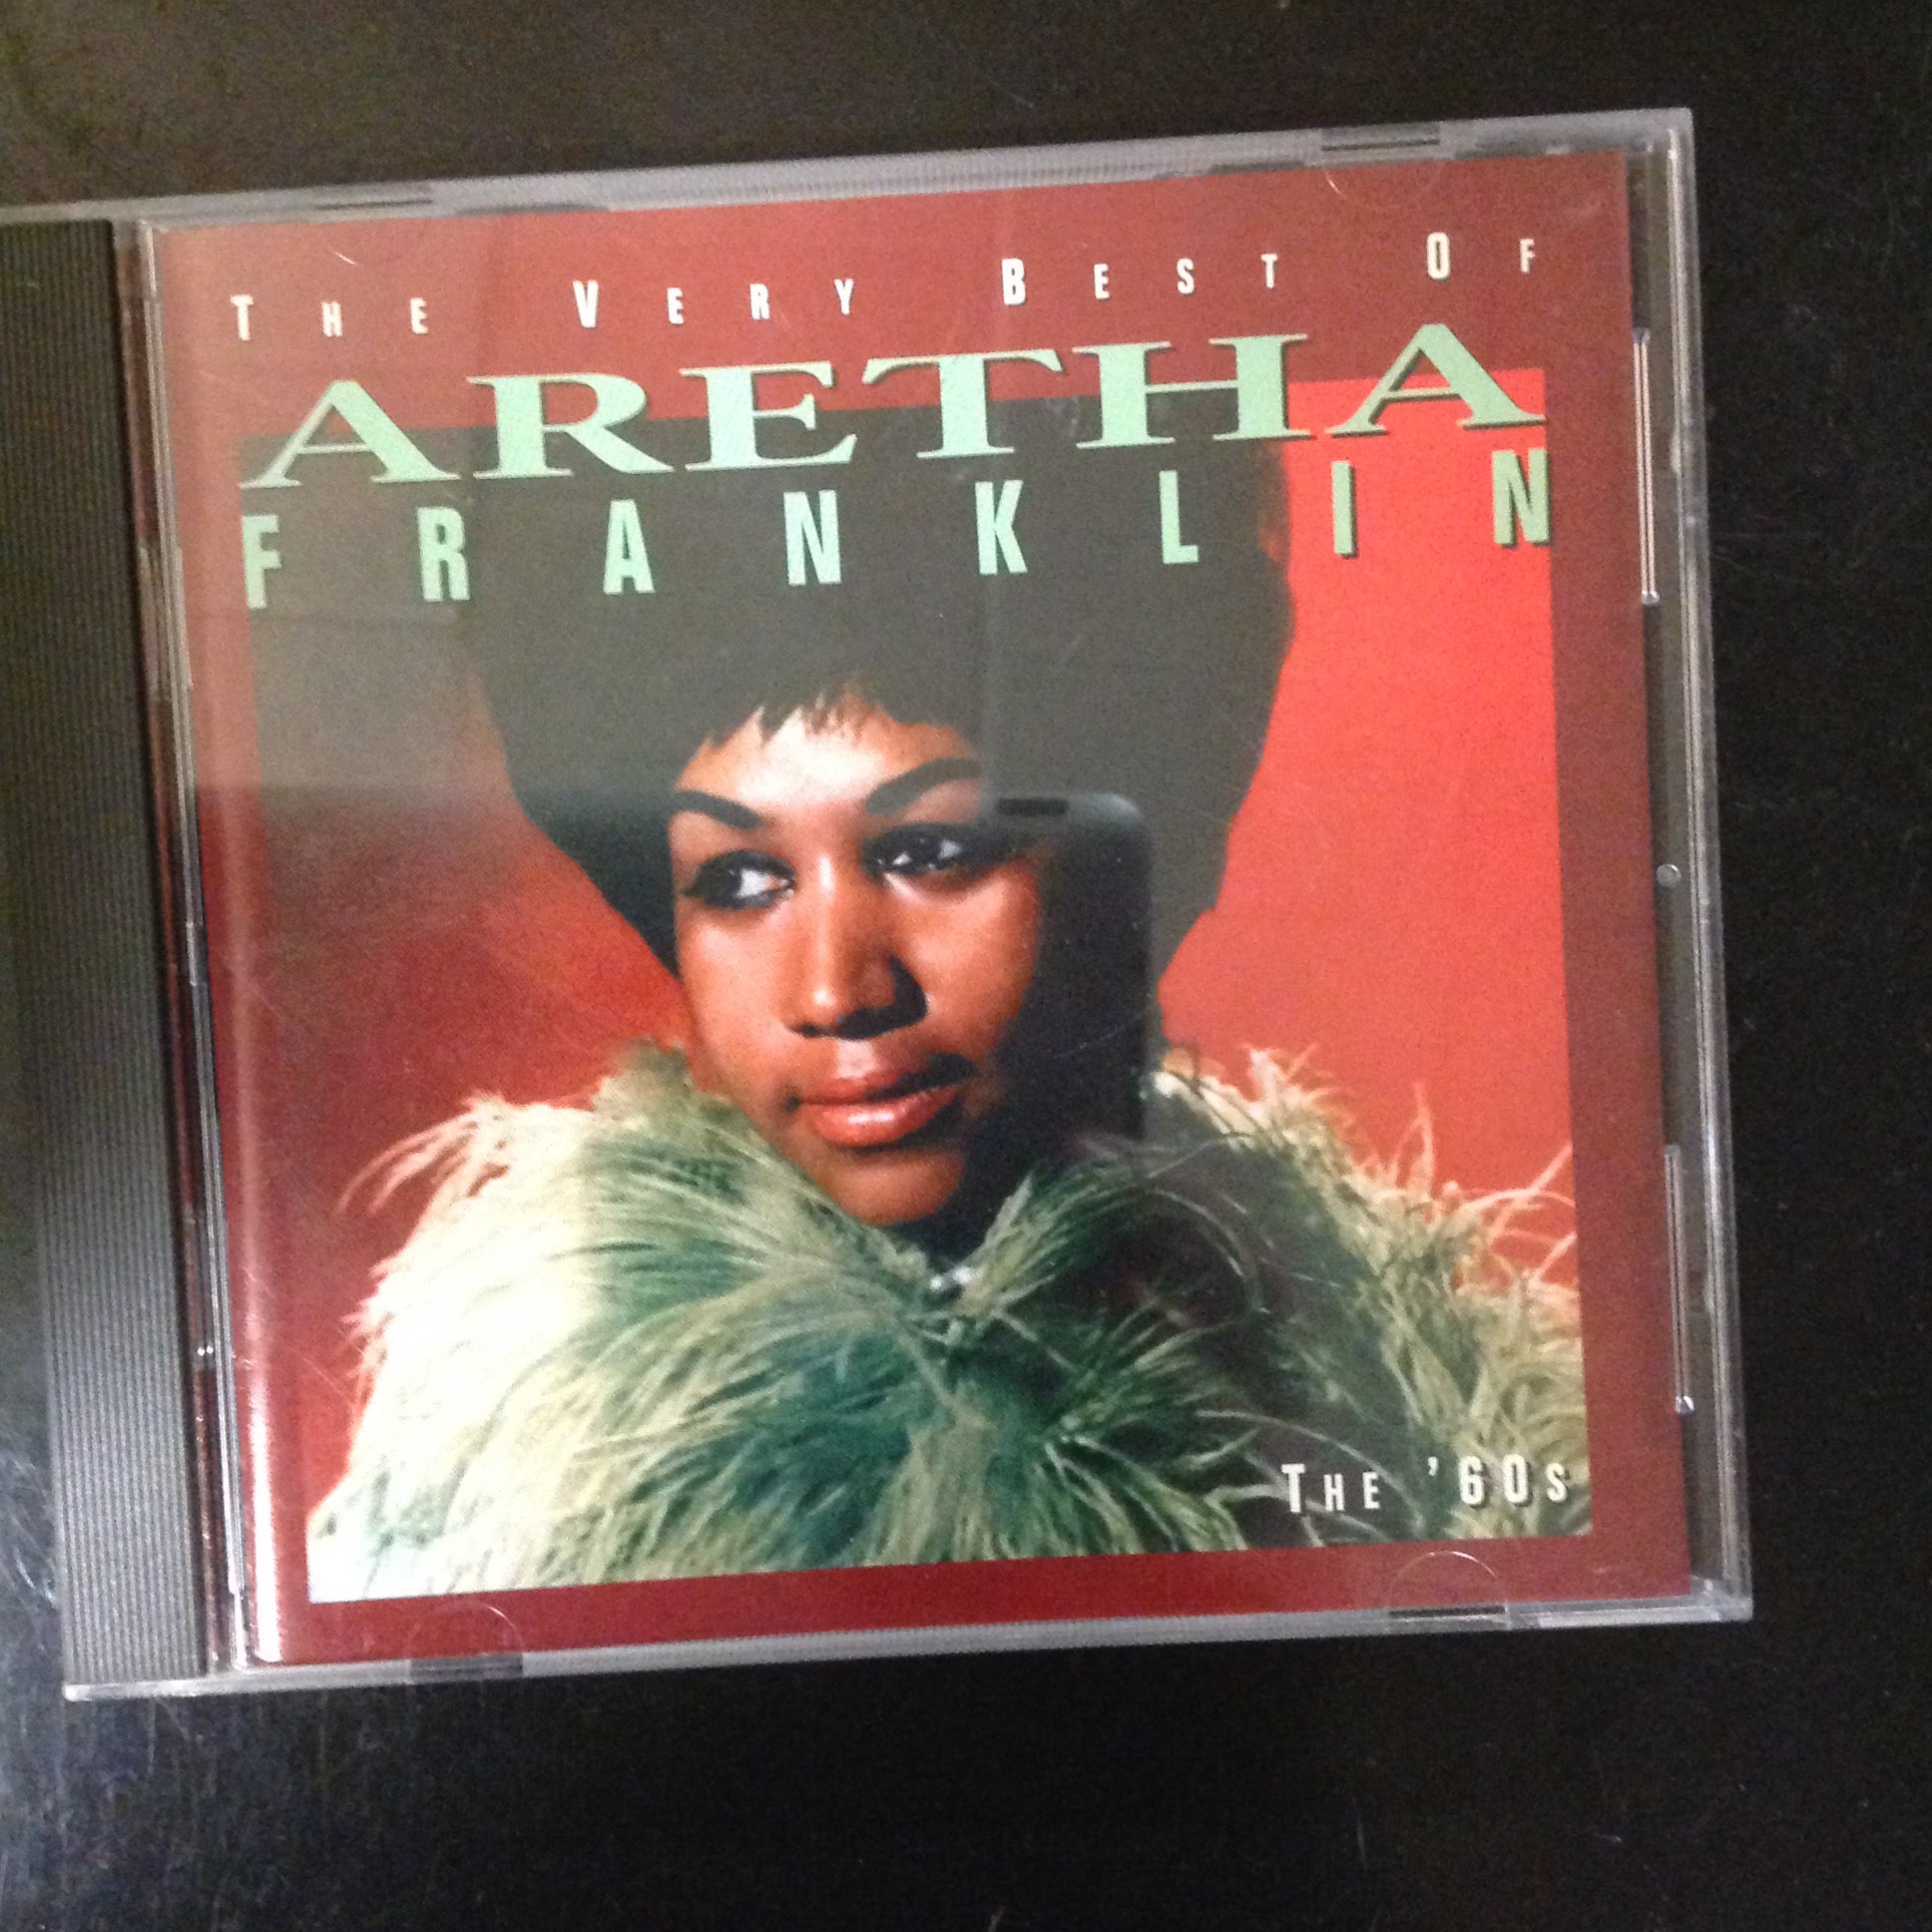 BARGAIN CD The Very Best of Aretha Franklin The 60's R@71598 Rhino